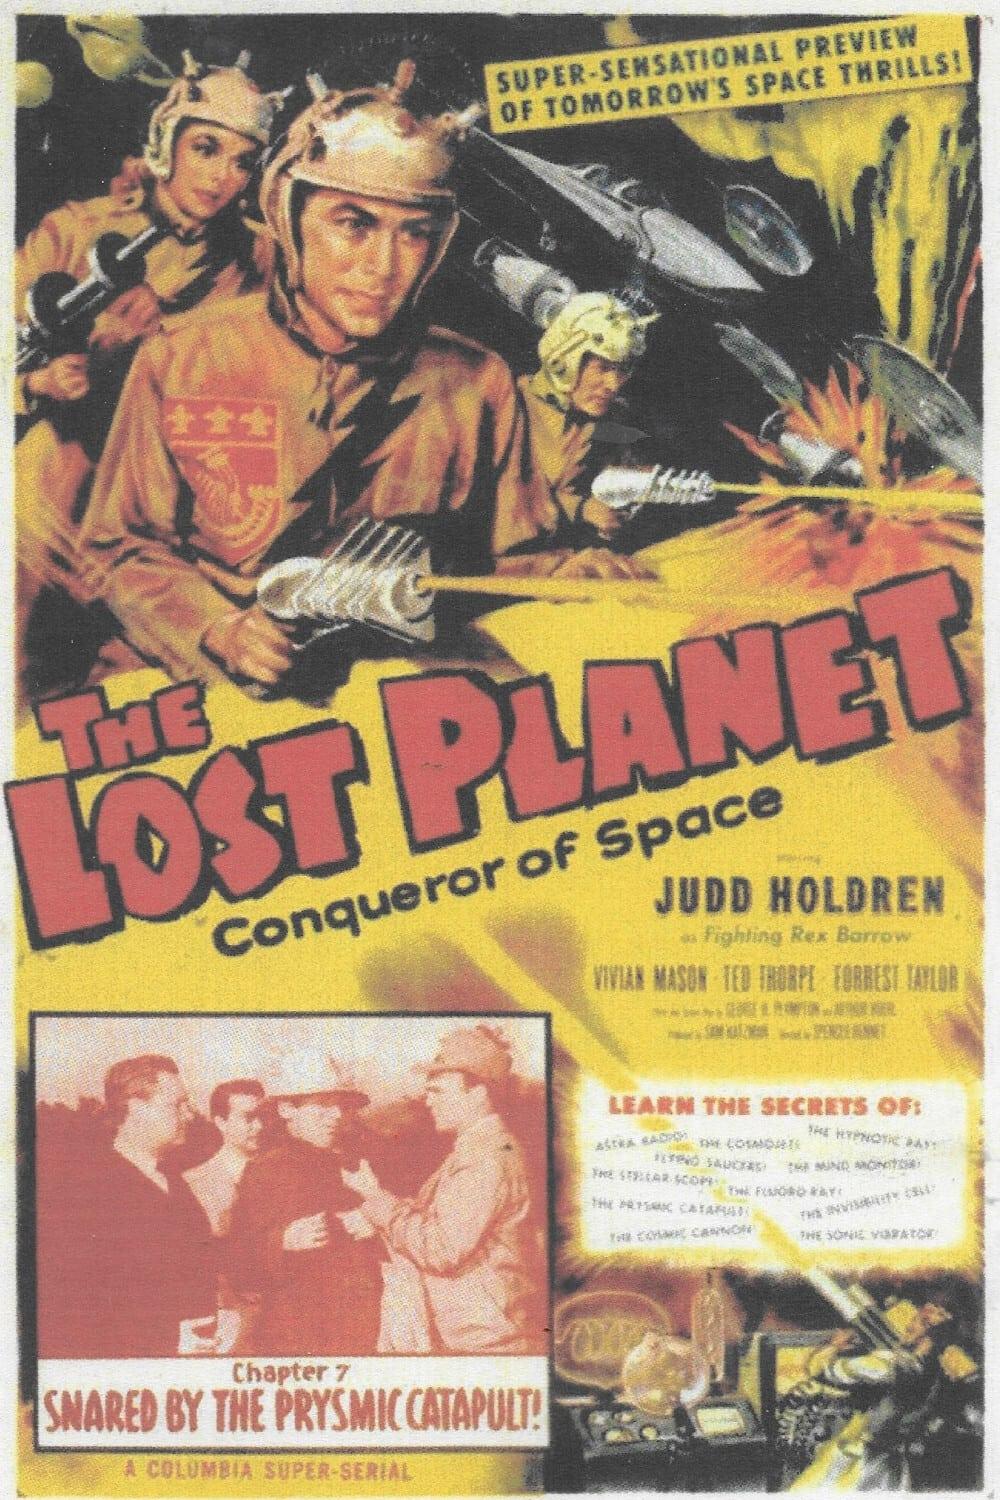 The Lost Planet poster